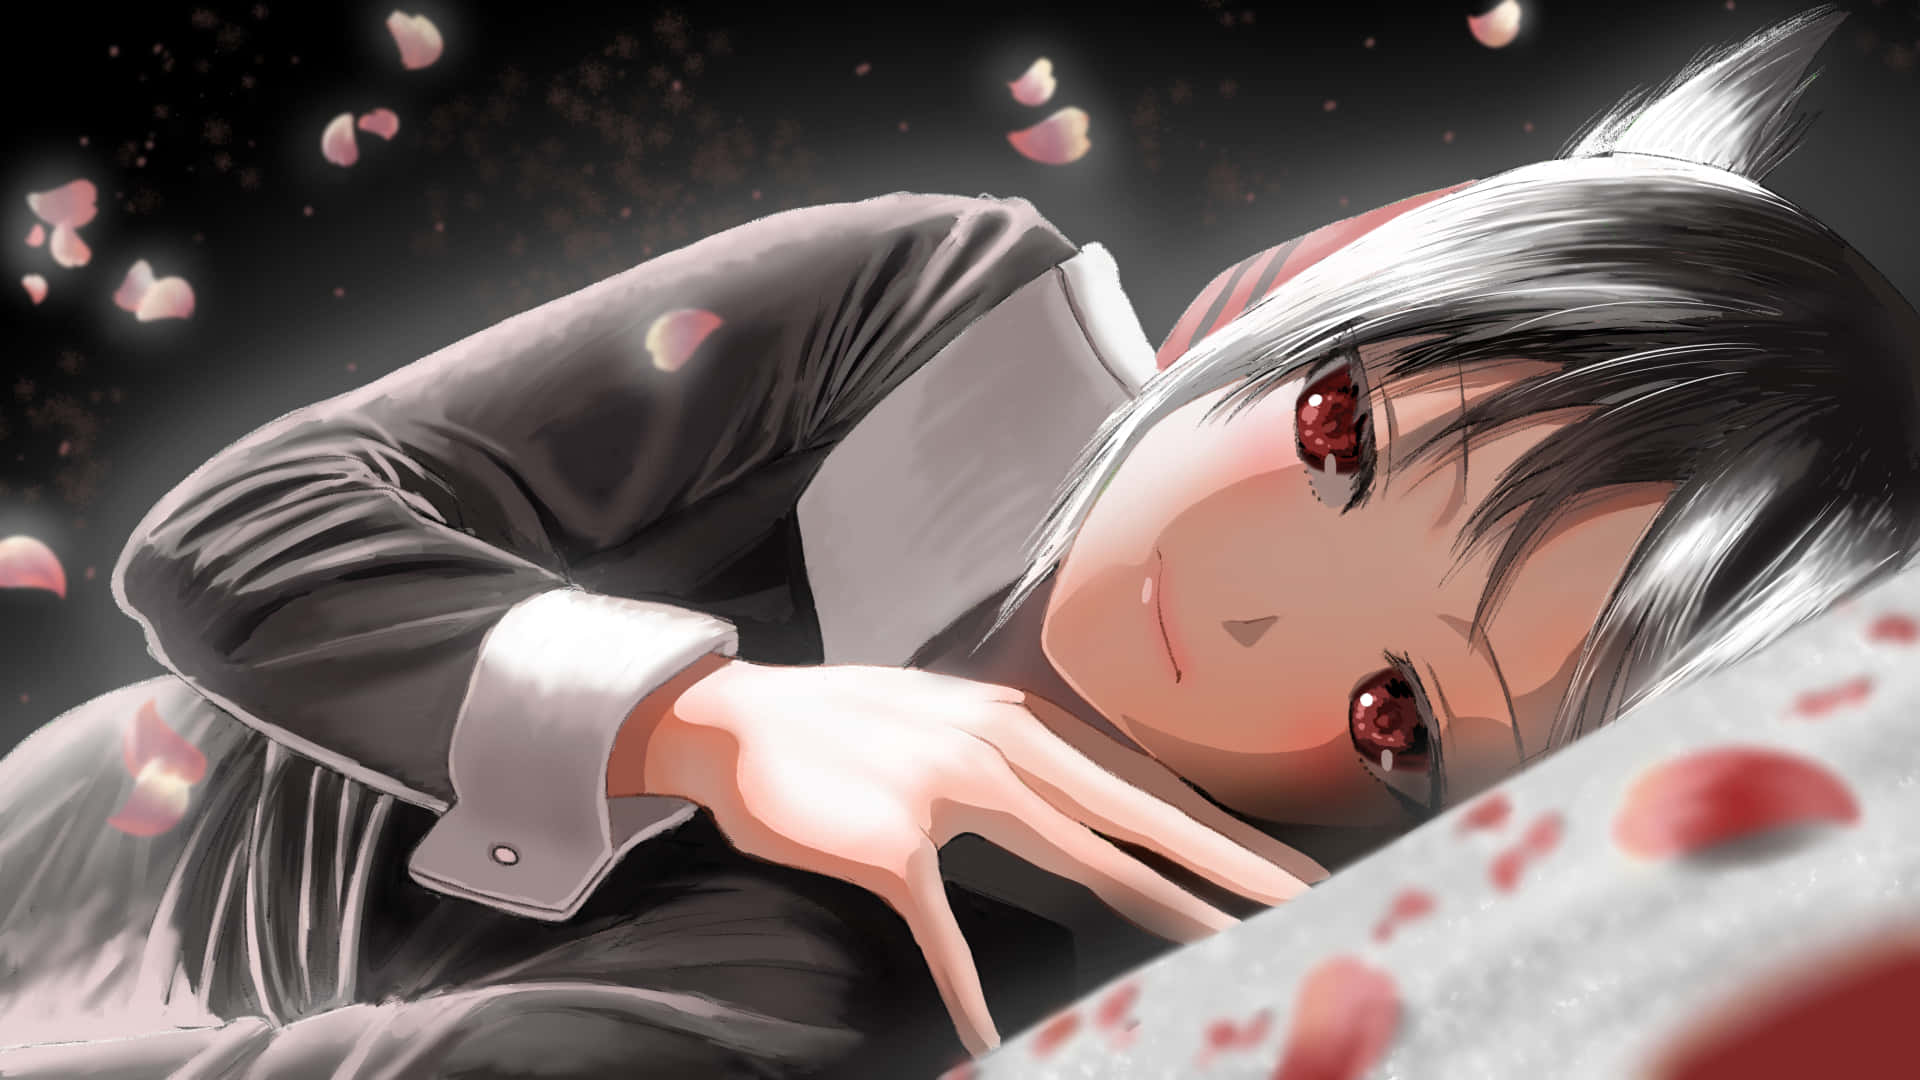 "Kaguya and Miyu in Kaguya Sama: Love Is War, looking for a peaceful resolution to their conflicts" Wallpaper